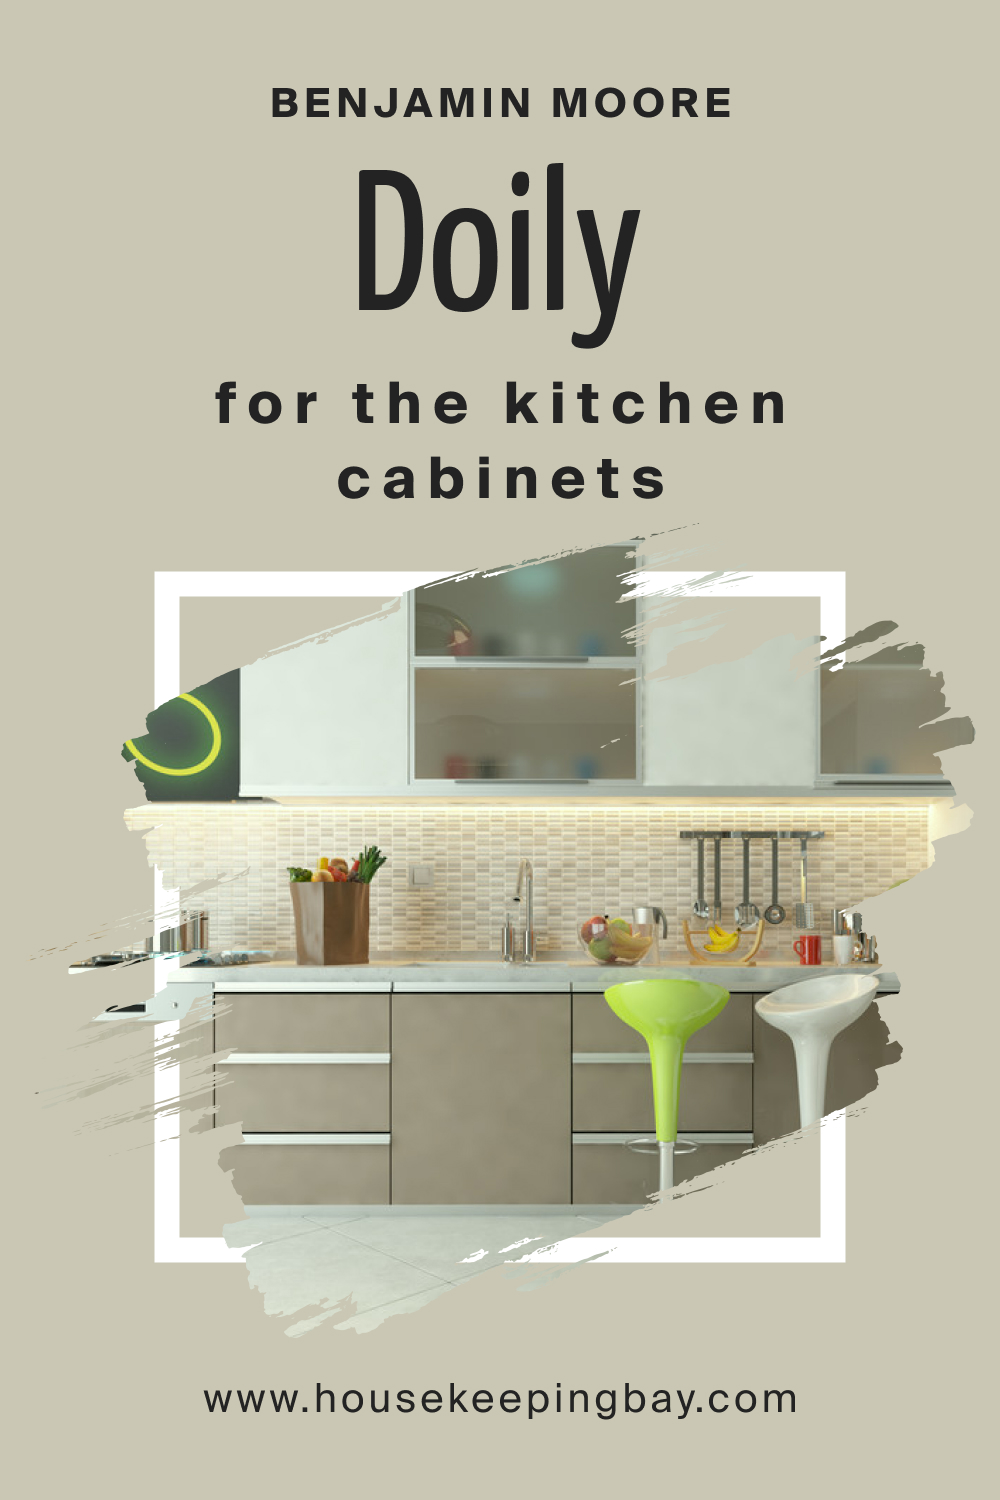 How to Use BM Doily CSP-130 on the Kitchen Cabinets?